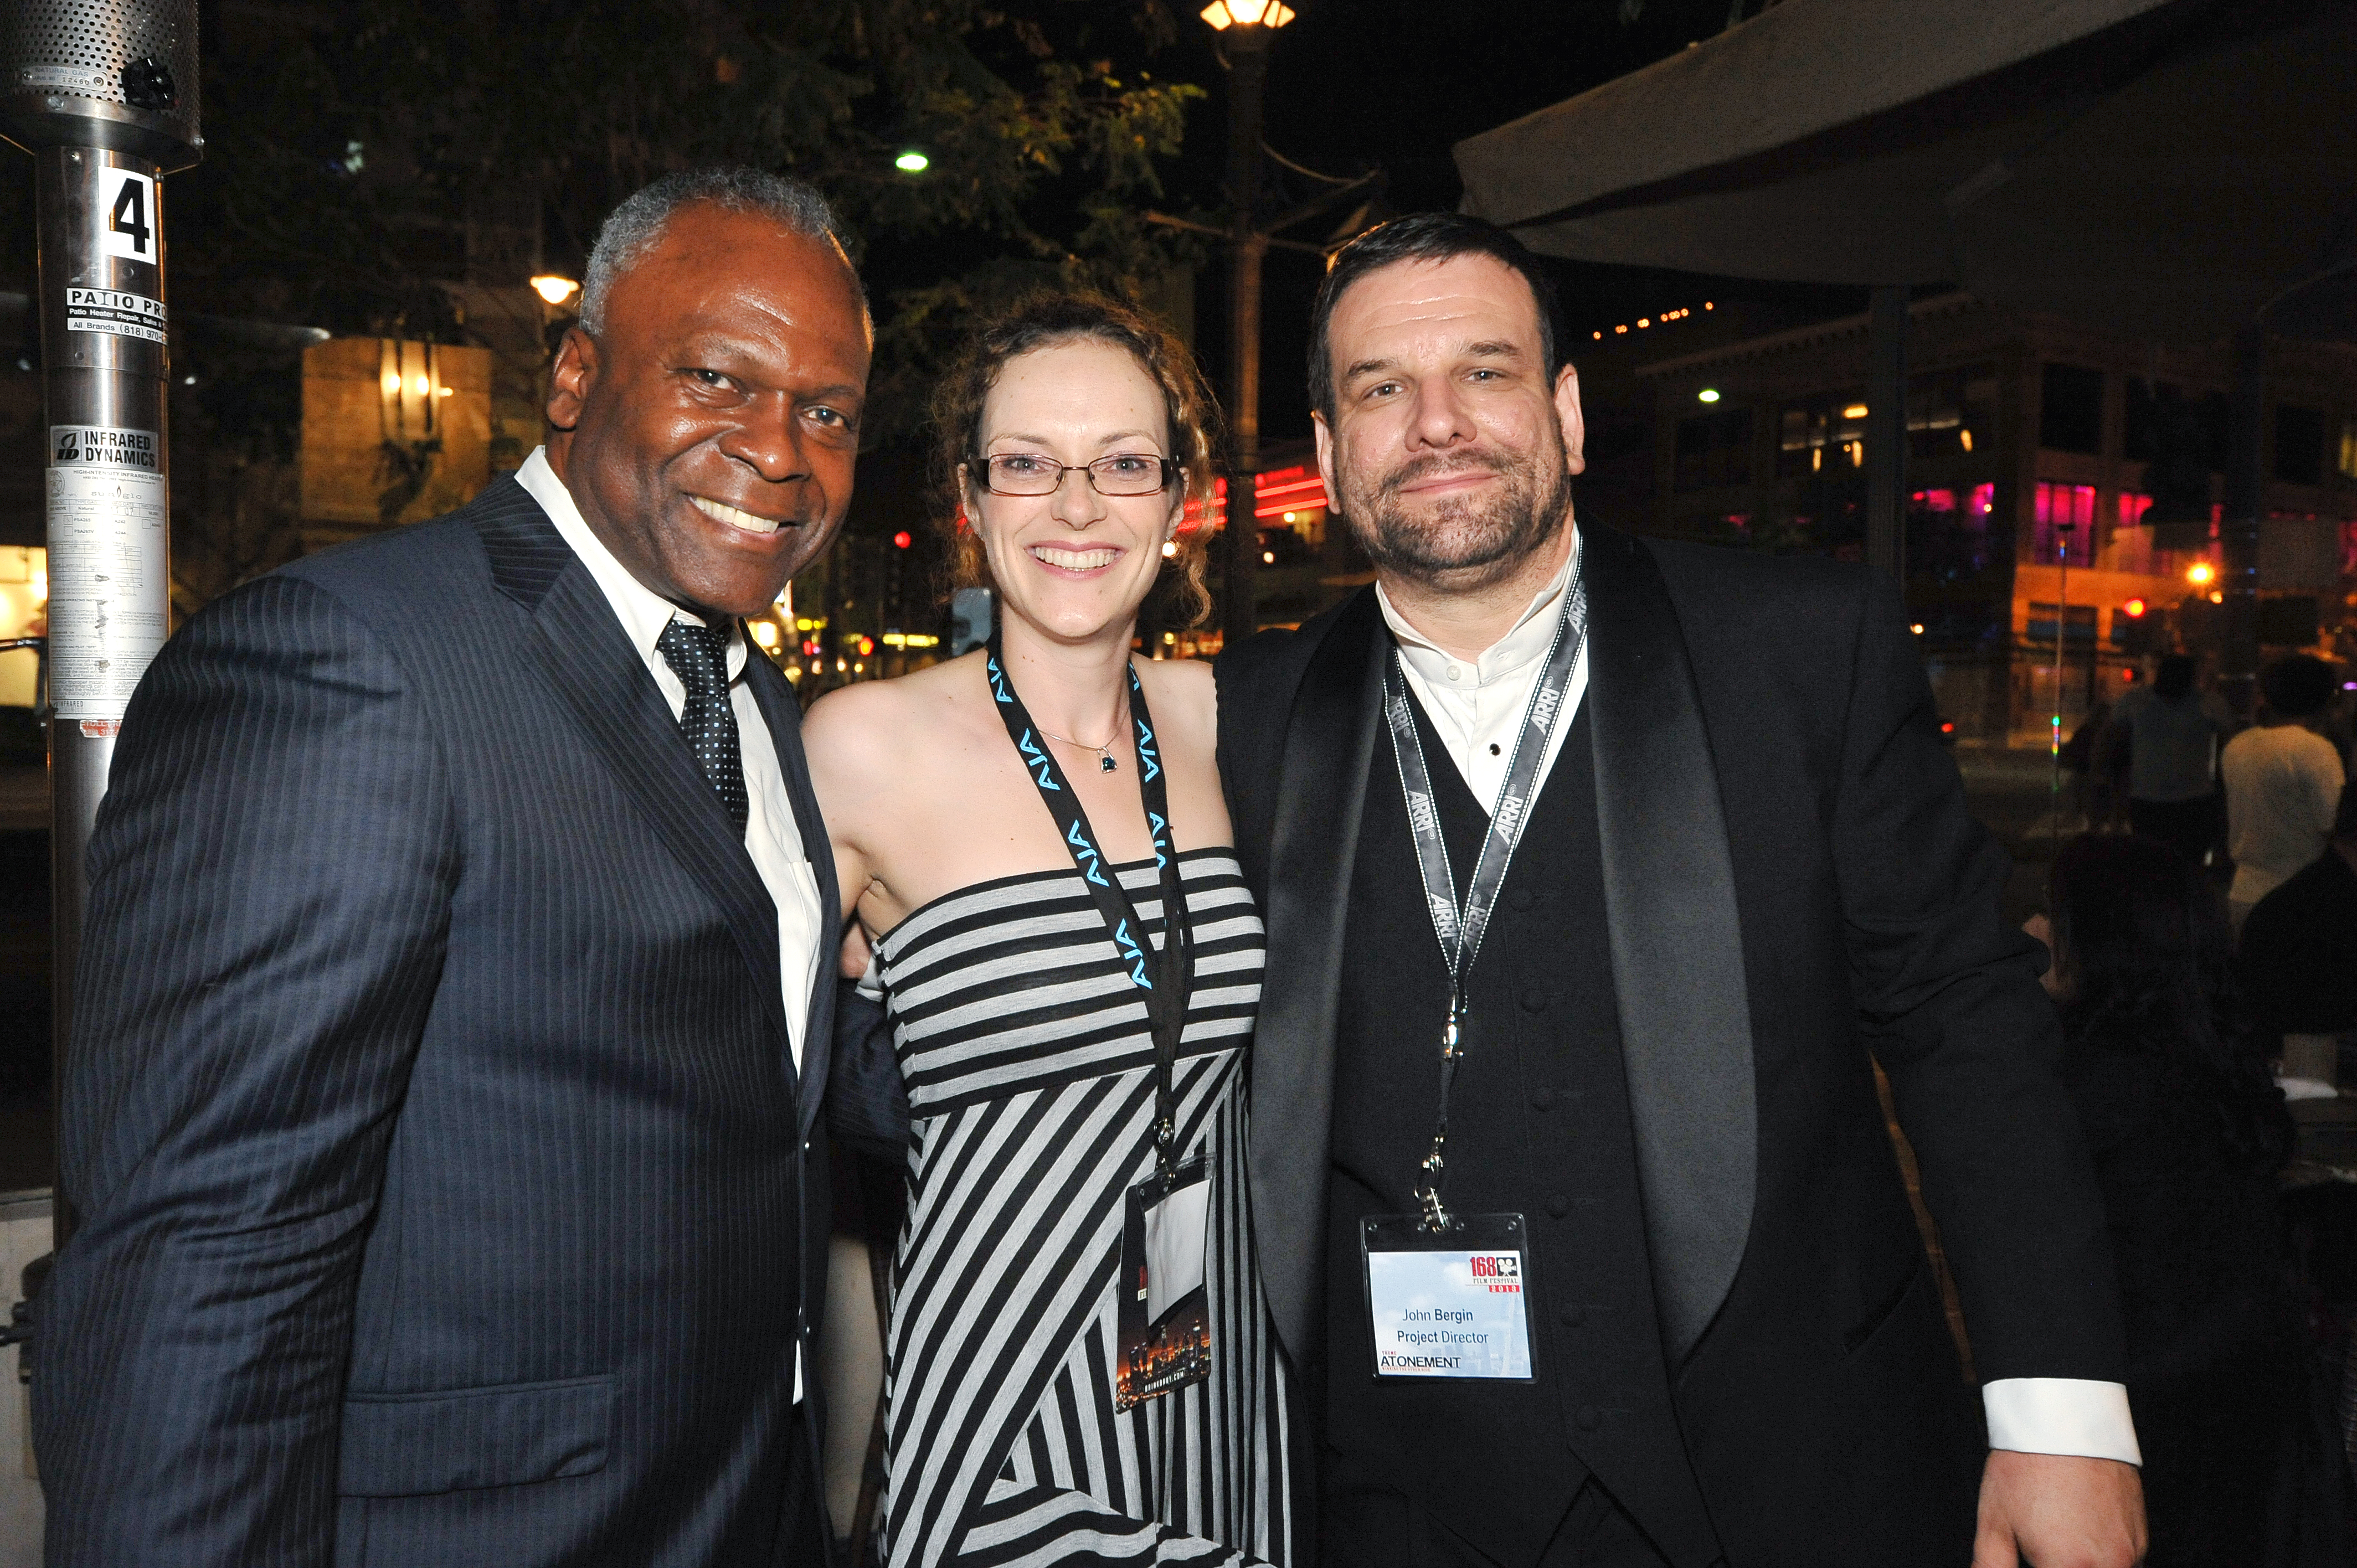 Kim Estes, Annie Bergin and John Bergin at the 168 Film Festival After Party, August 10th, 2013